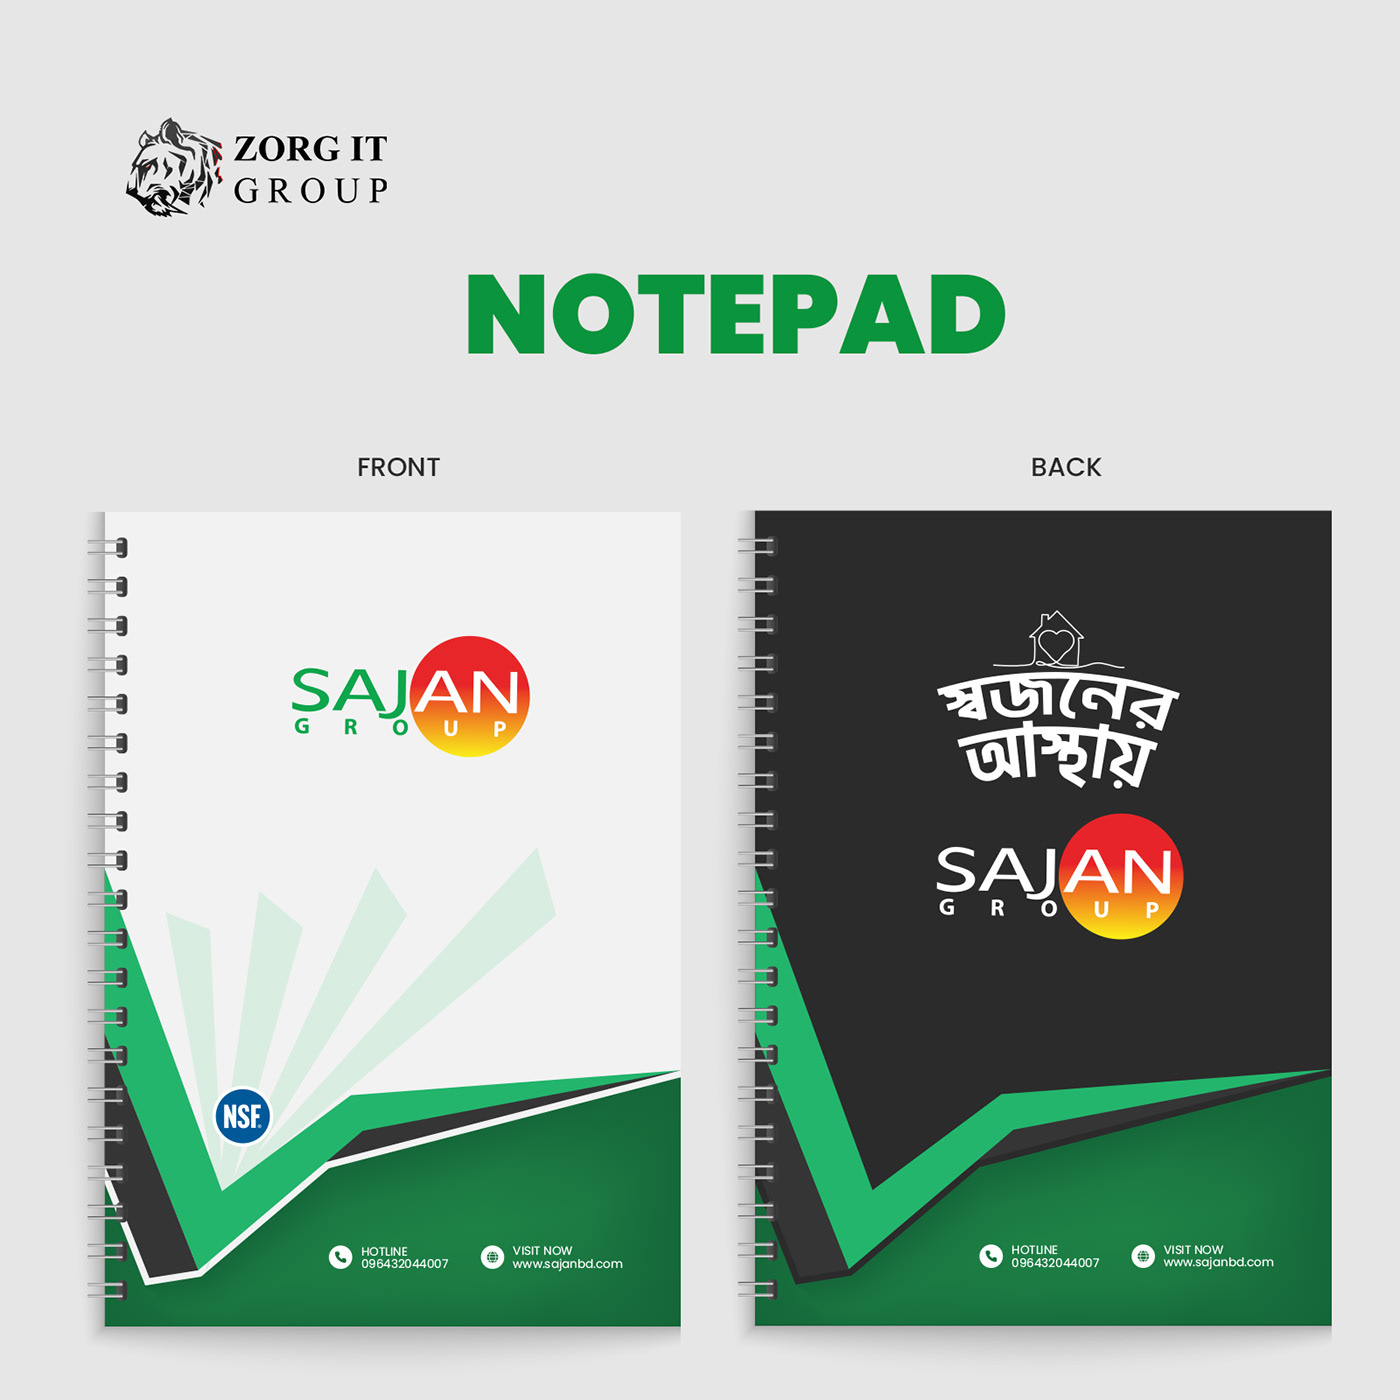 Notepad Design by Zorg IT Group.